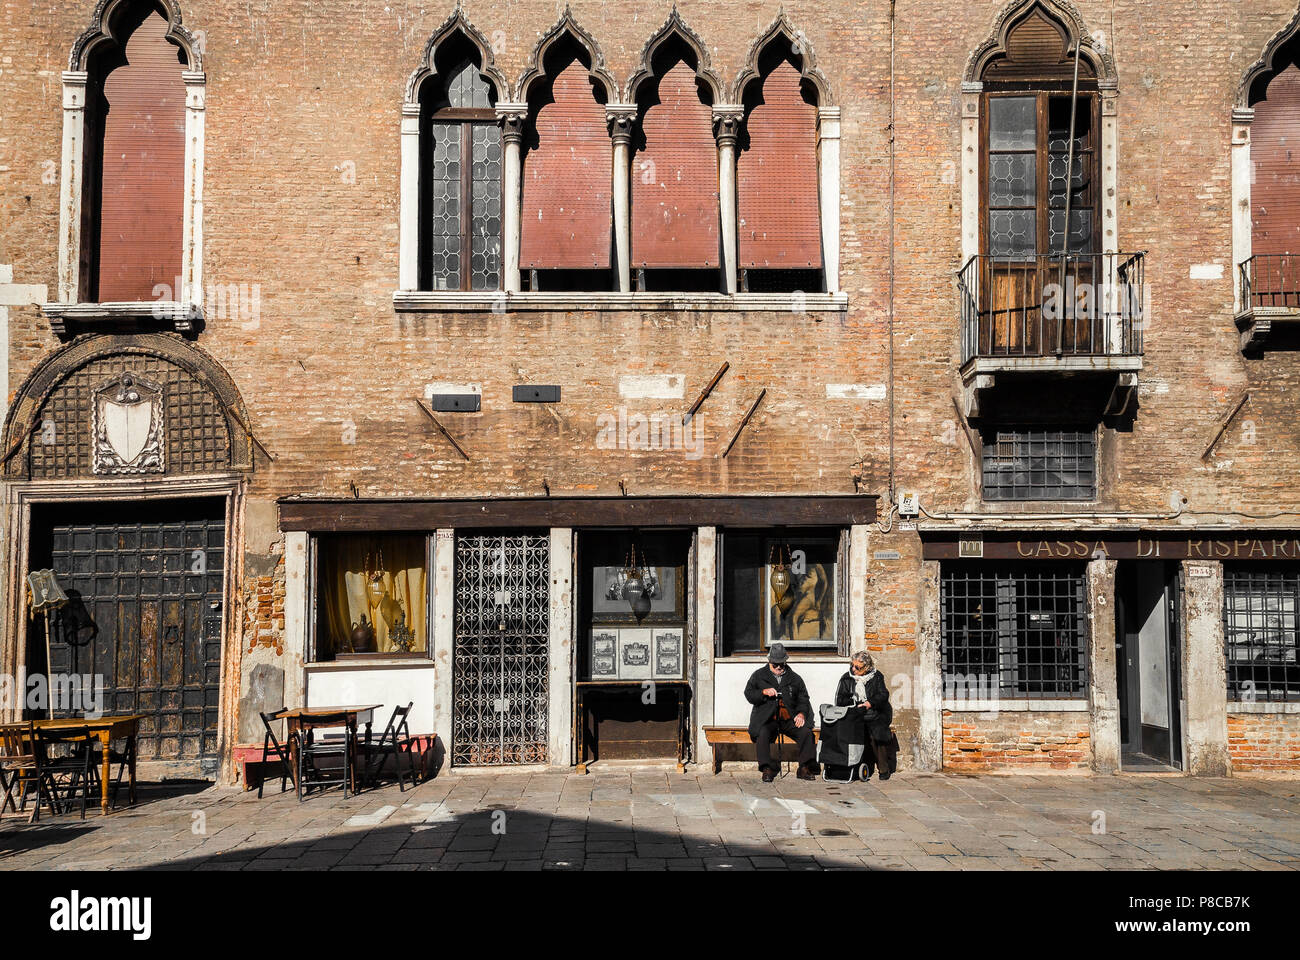 Elderly man and woman sitting in front of old Venetian building in bright spring sunlight, Venice Italy Stock Photo